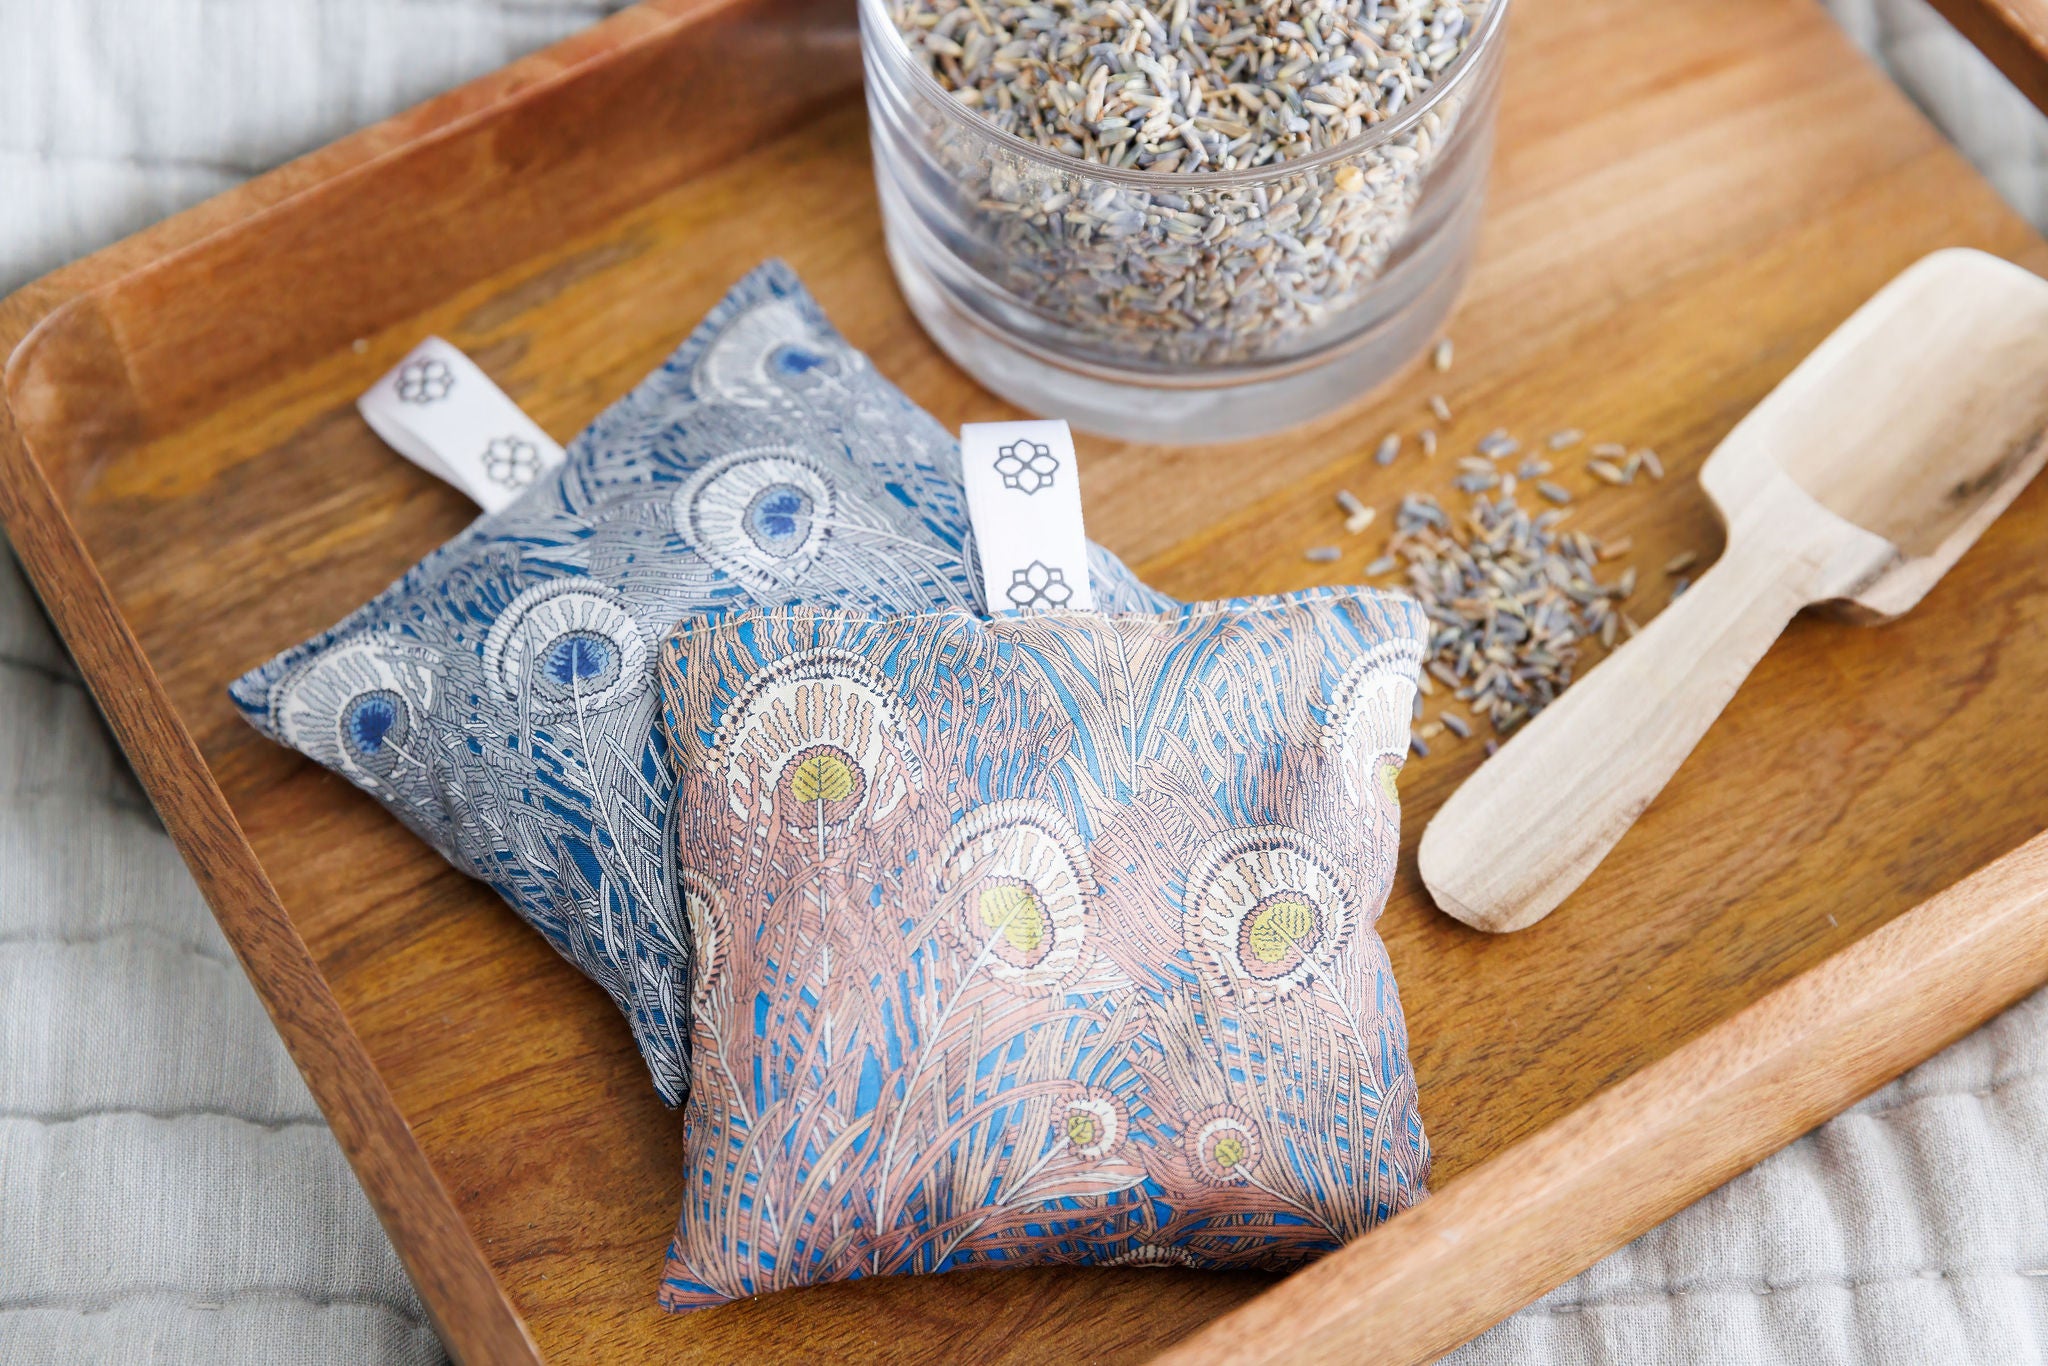 Spritz Wellness Lavender Sachets use as a sleep aid or to refresh closets